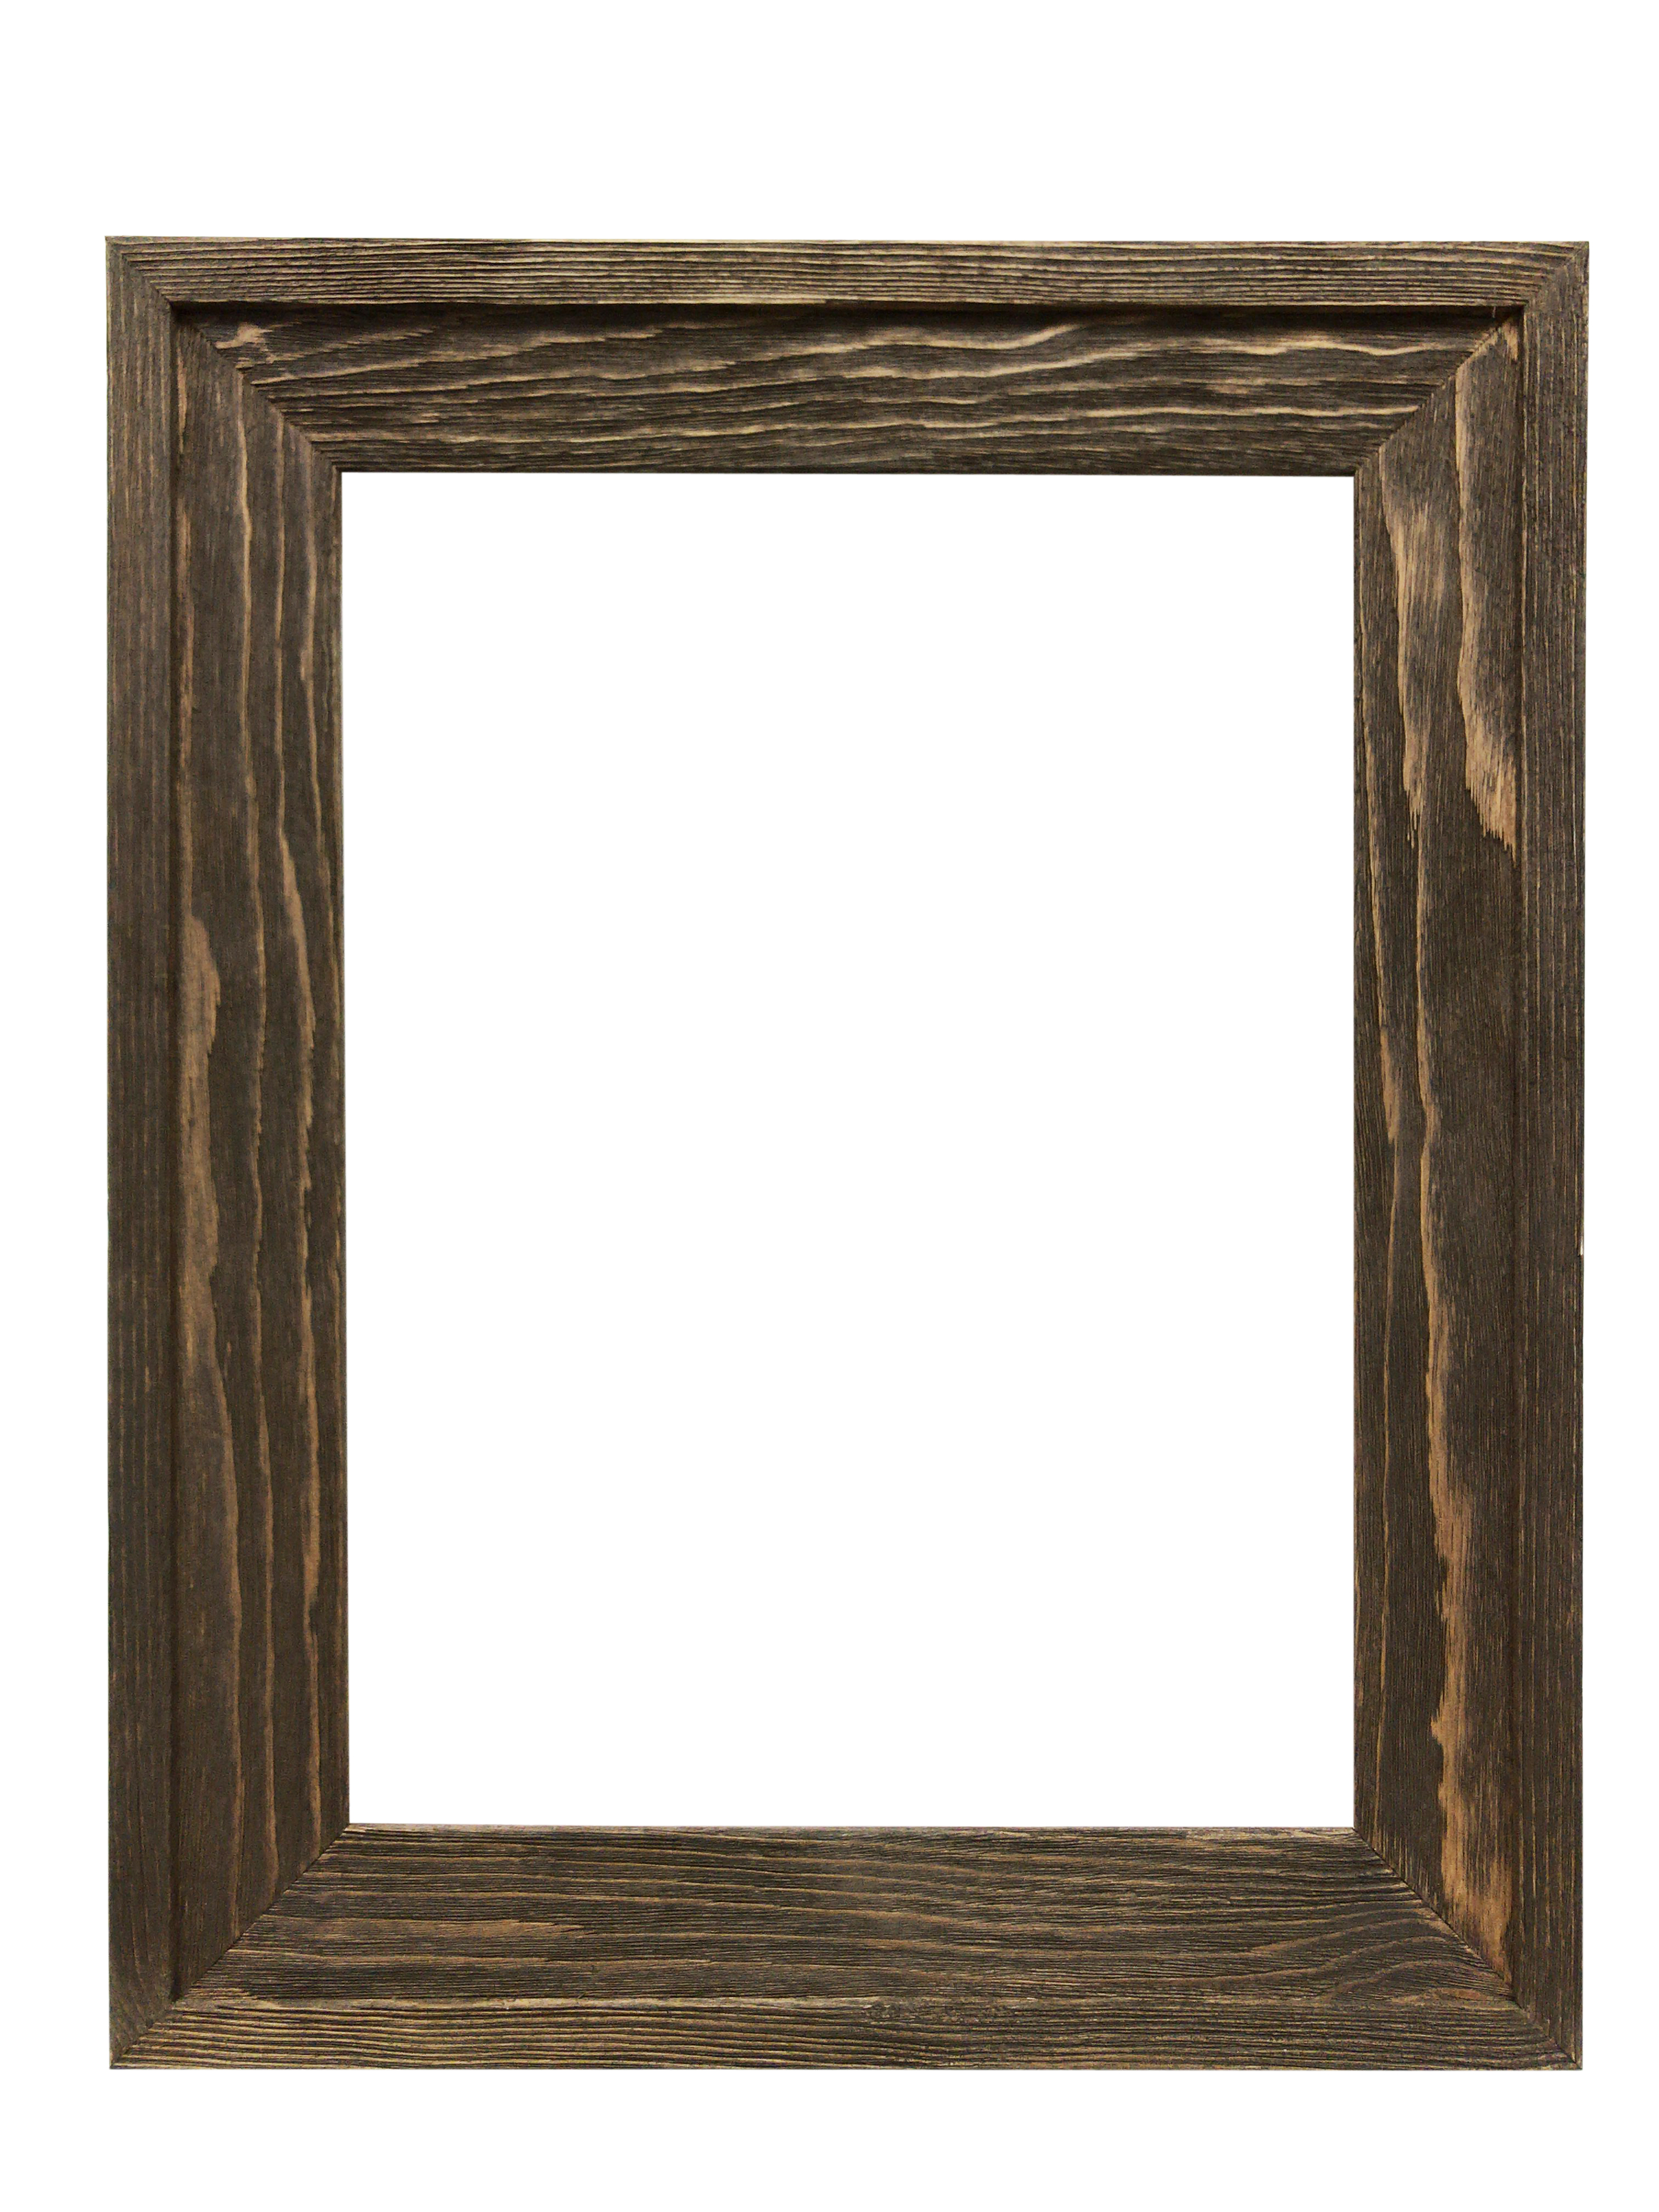 3x5 Flat Style unfinished weathered rustic barnwood barn wood picture frame 